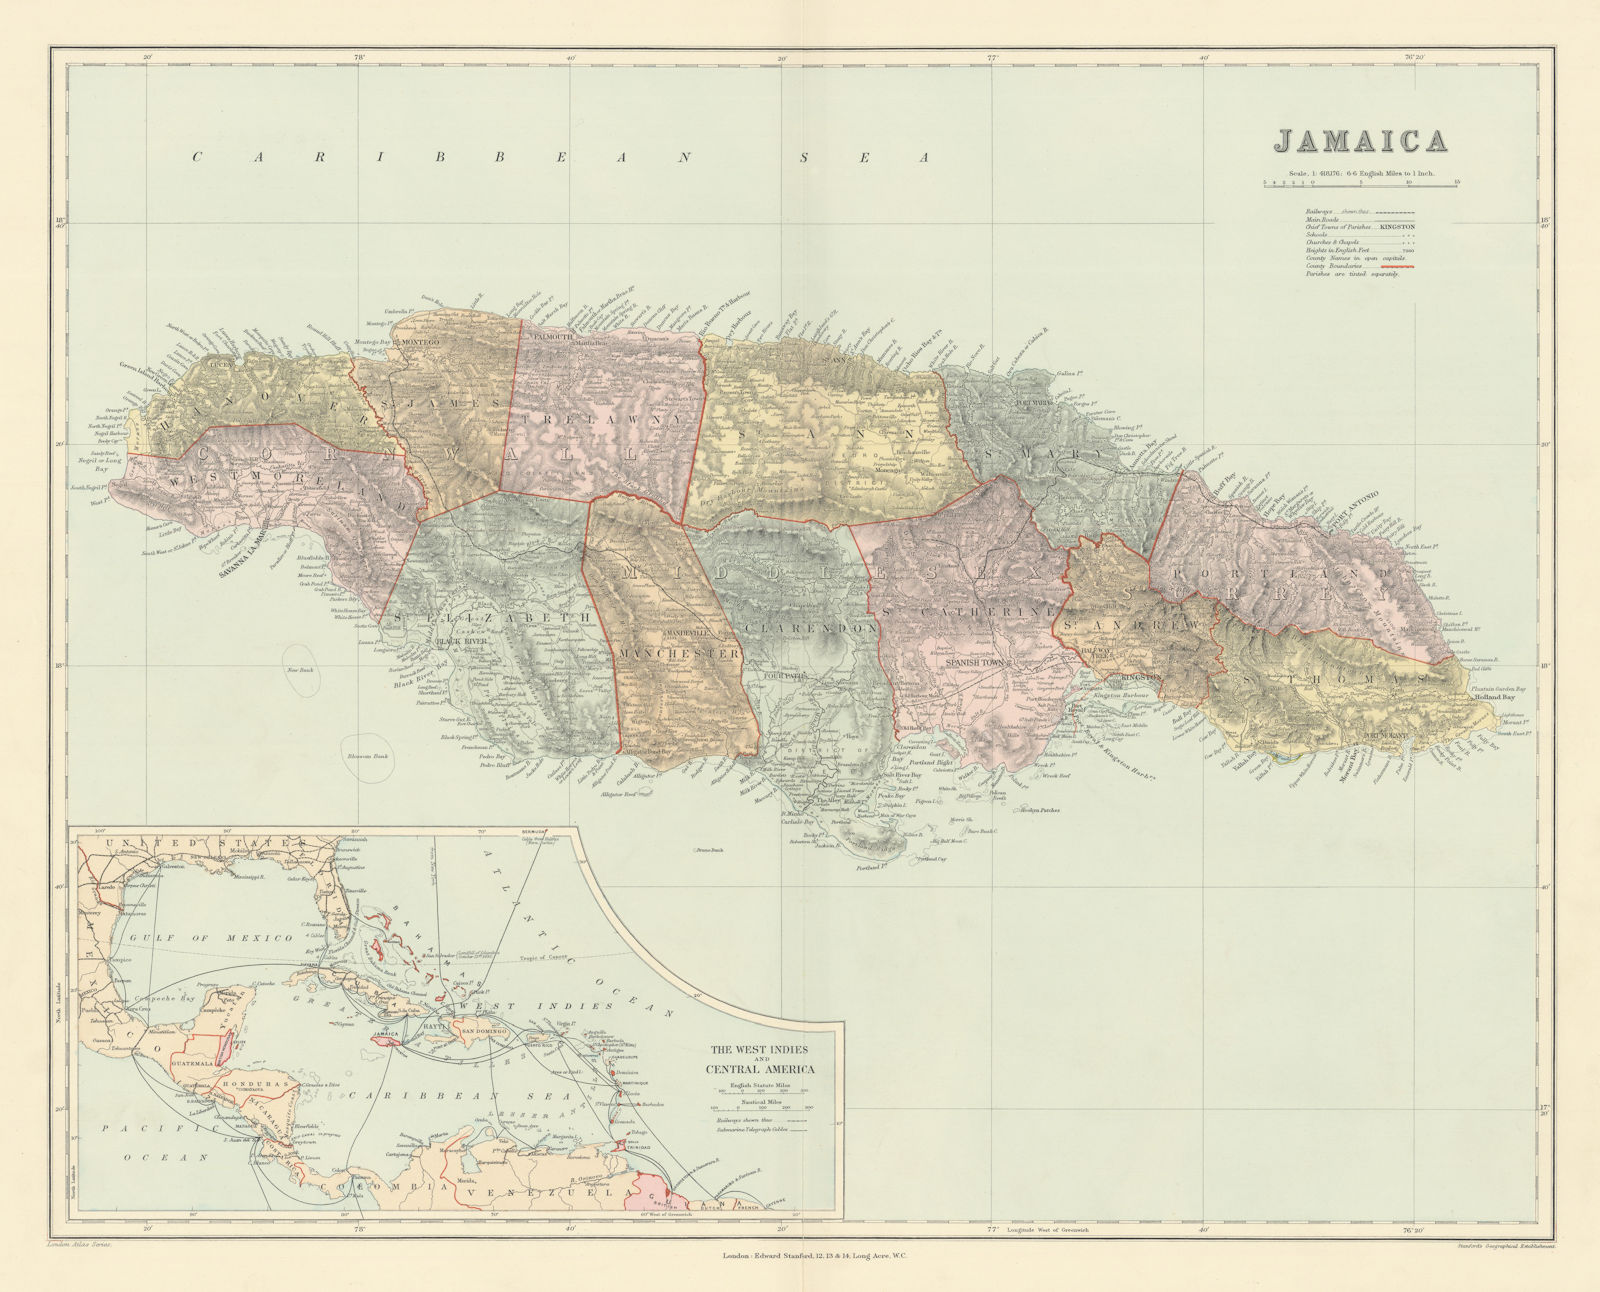 Jamaica, in parishes. West Indies telegraph cables. 51x63cm. STANFORD 1904 map